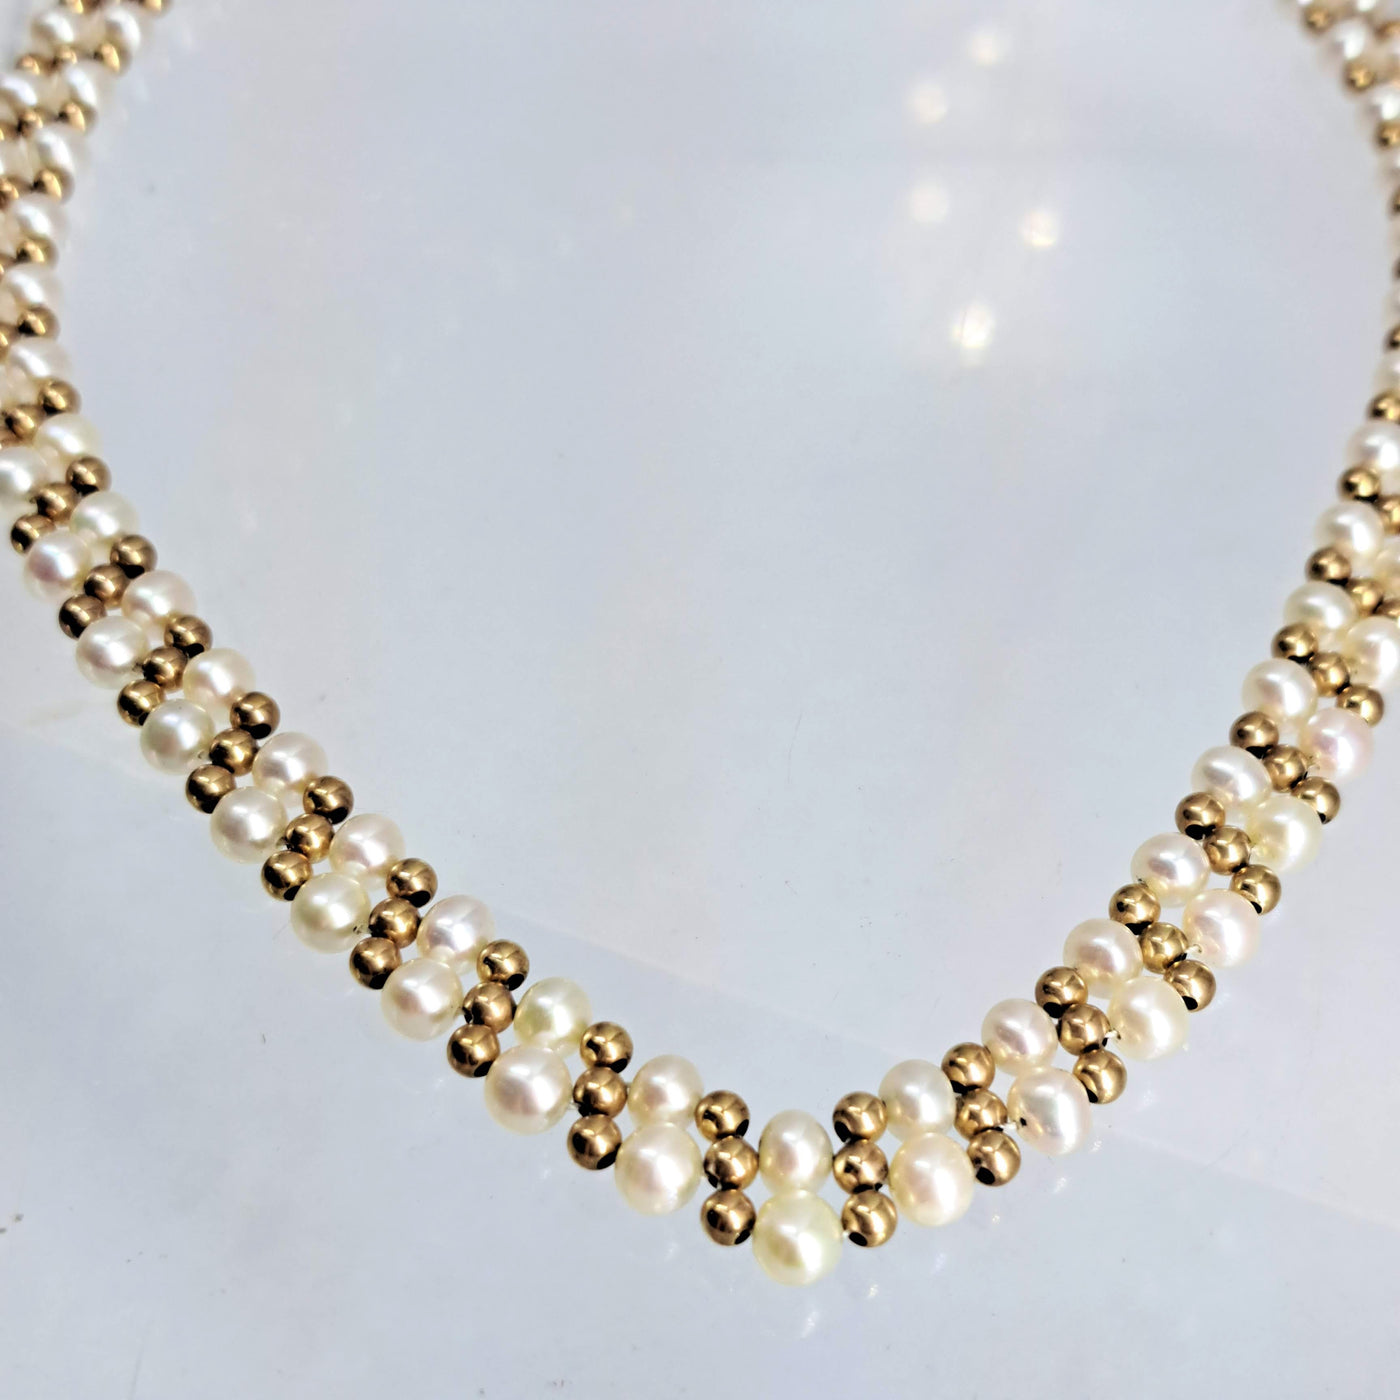 "On Point" 16" Necklace - Petit Pearls, 14K Gold